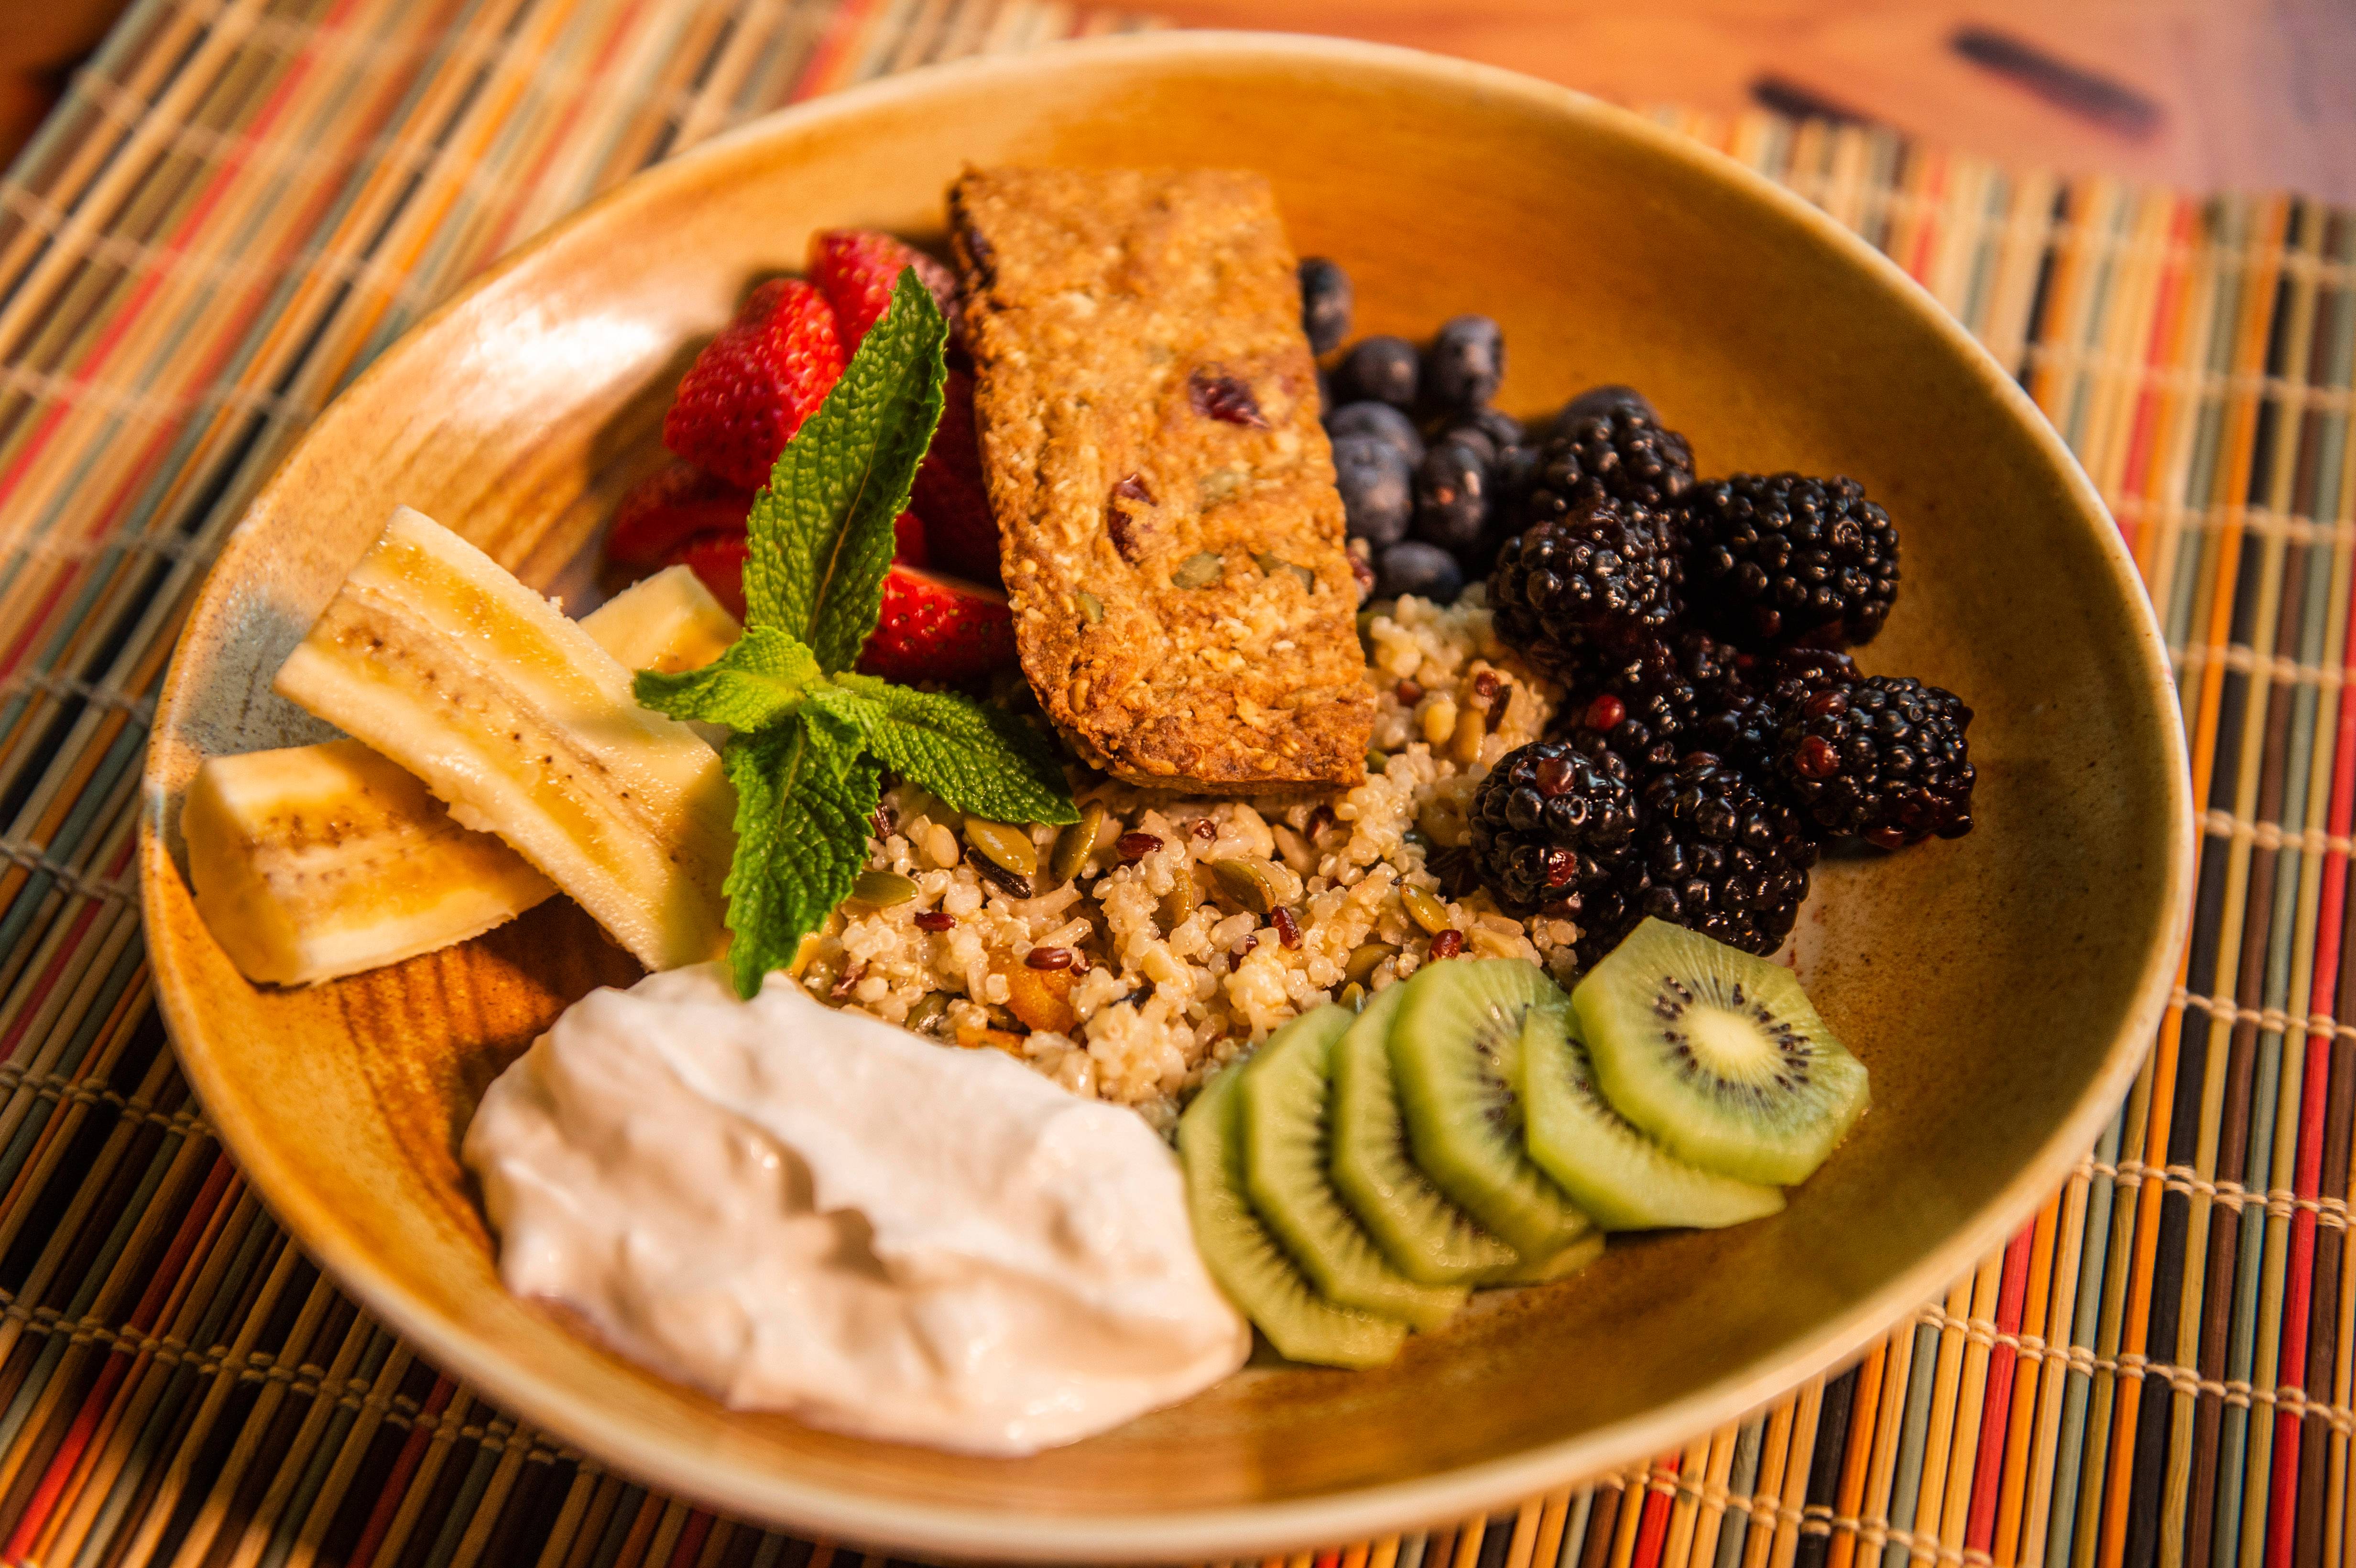 Plant Based Foods - Enriching Grains and Fruit from Sanaa at Animal Kingdom Lodge at Walt Disney World Resort, which features mixed grains, seasonal fruit, South African Rusk and coconut milk yogurt